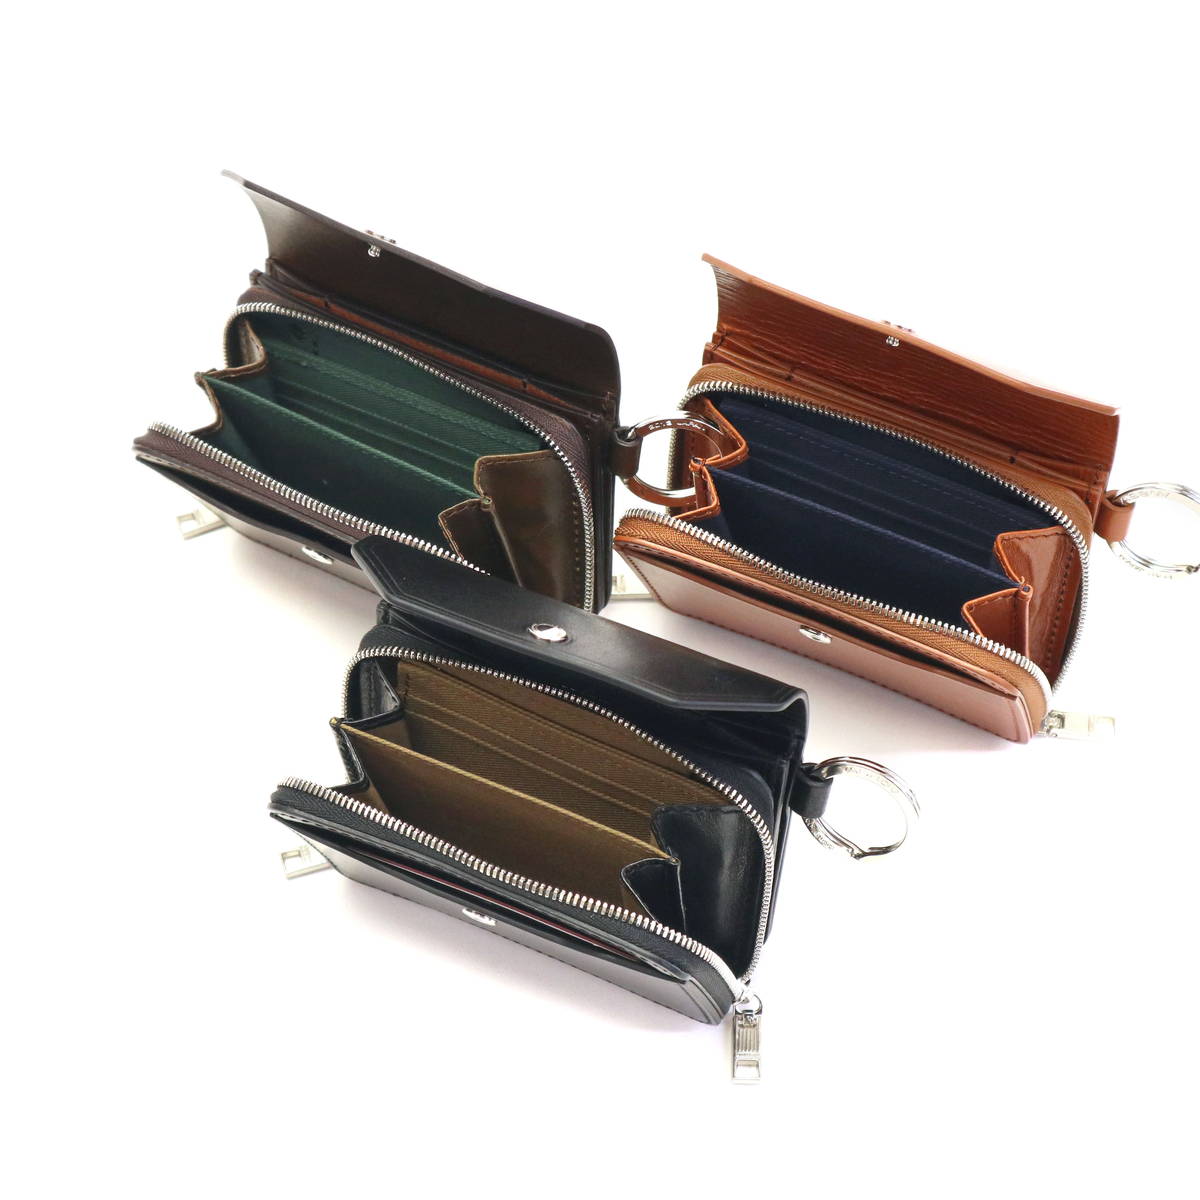 AS2OV アッソブ OILED ANTIEQUE LEATHER SHORT WALLET 041901｜【正規